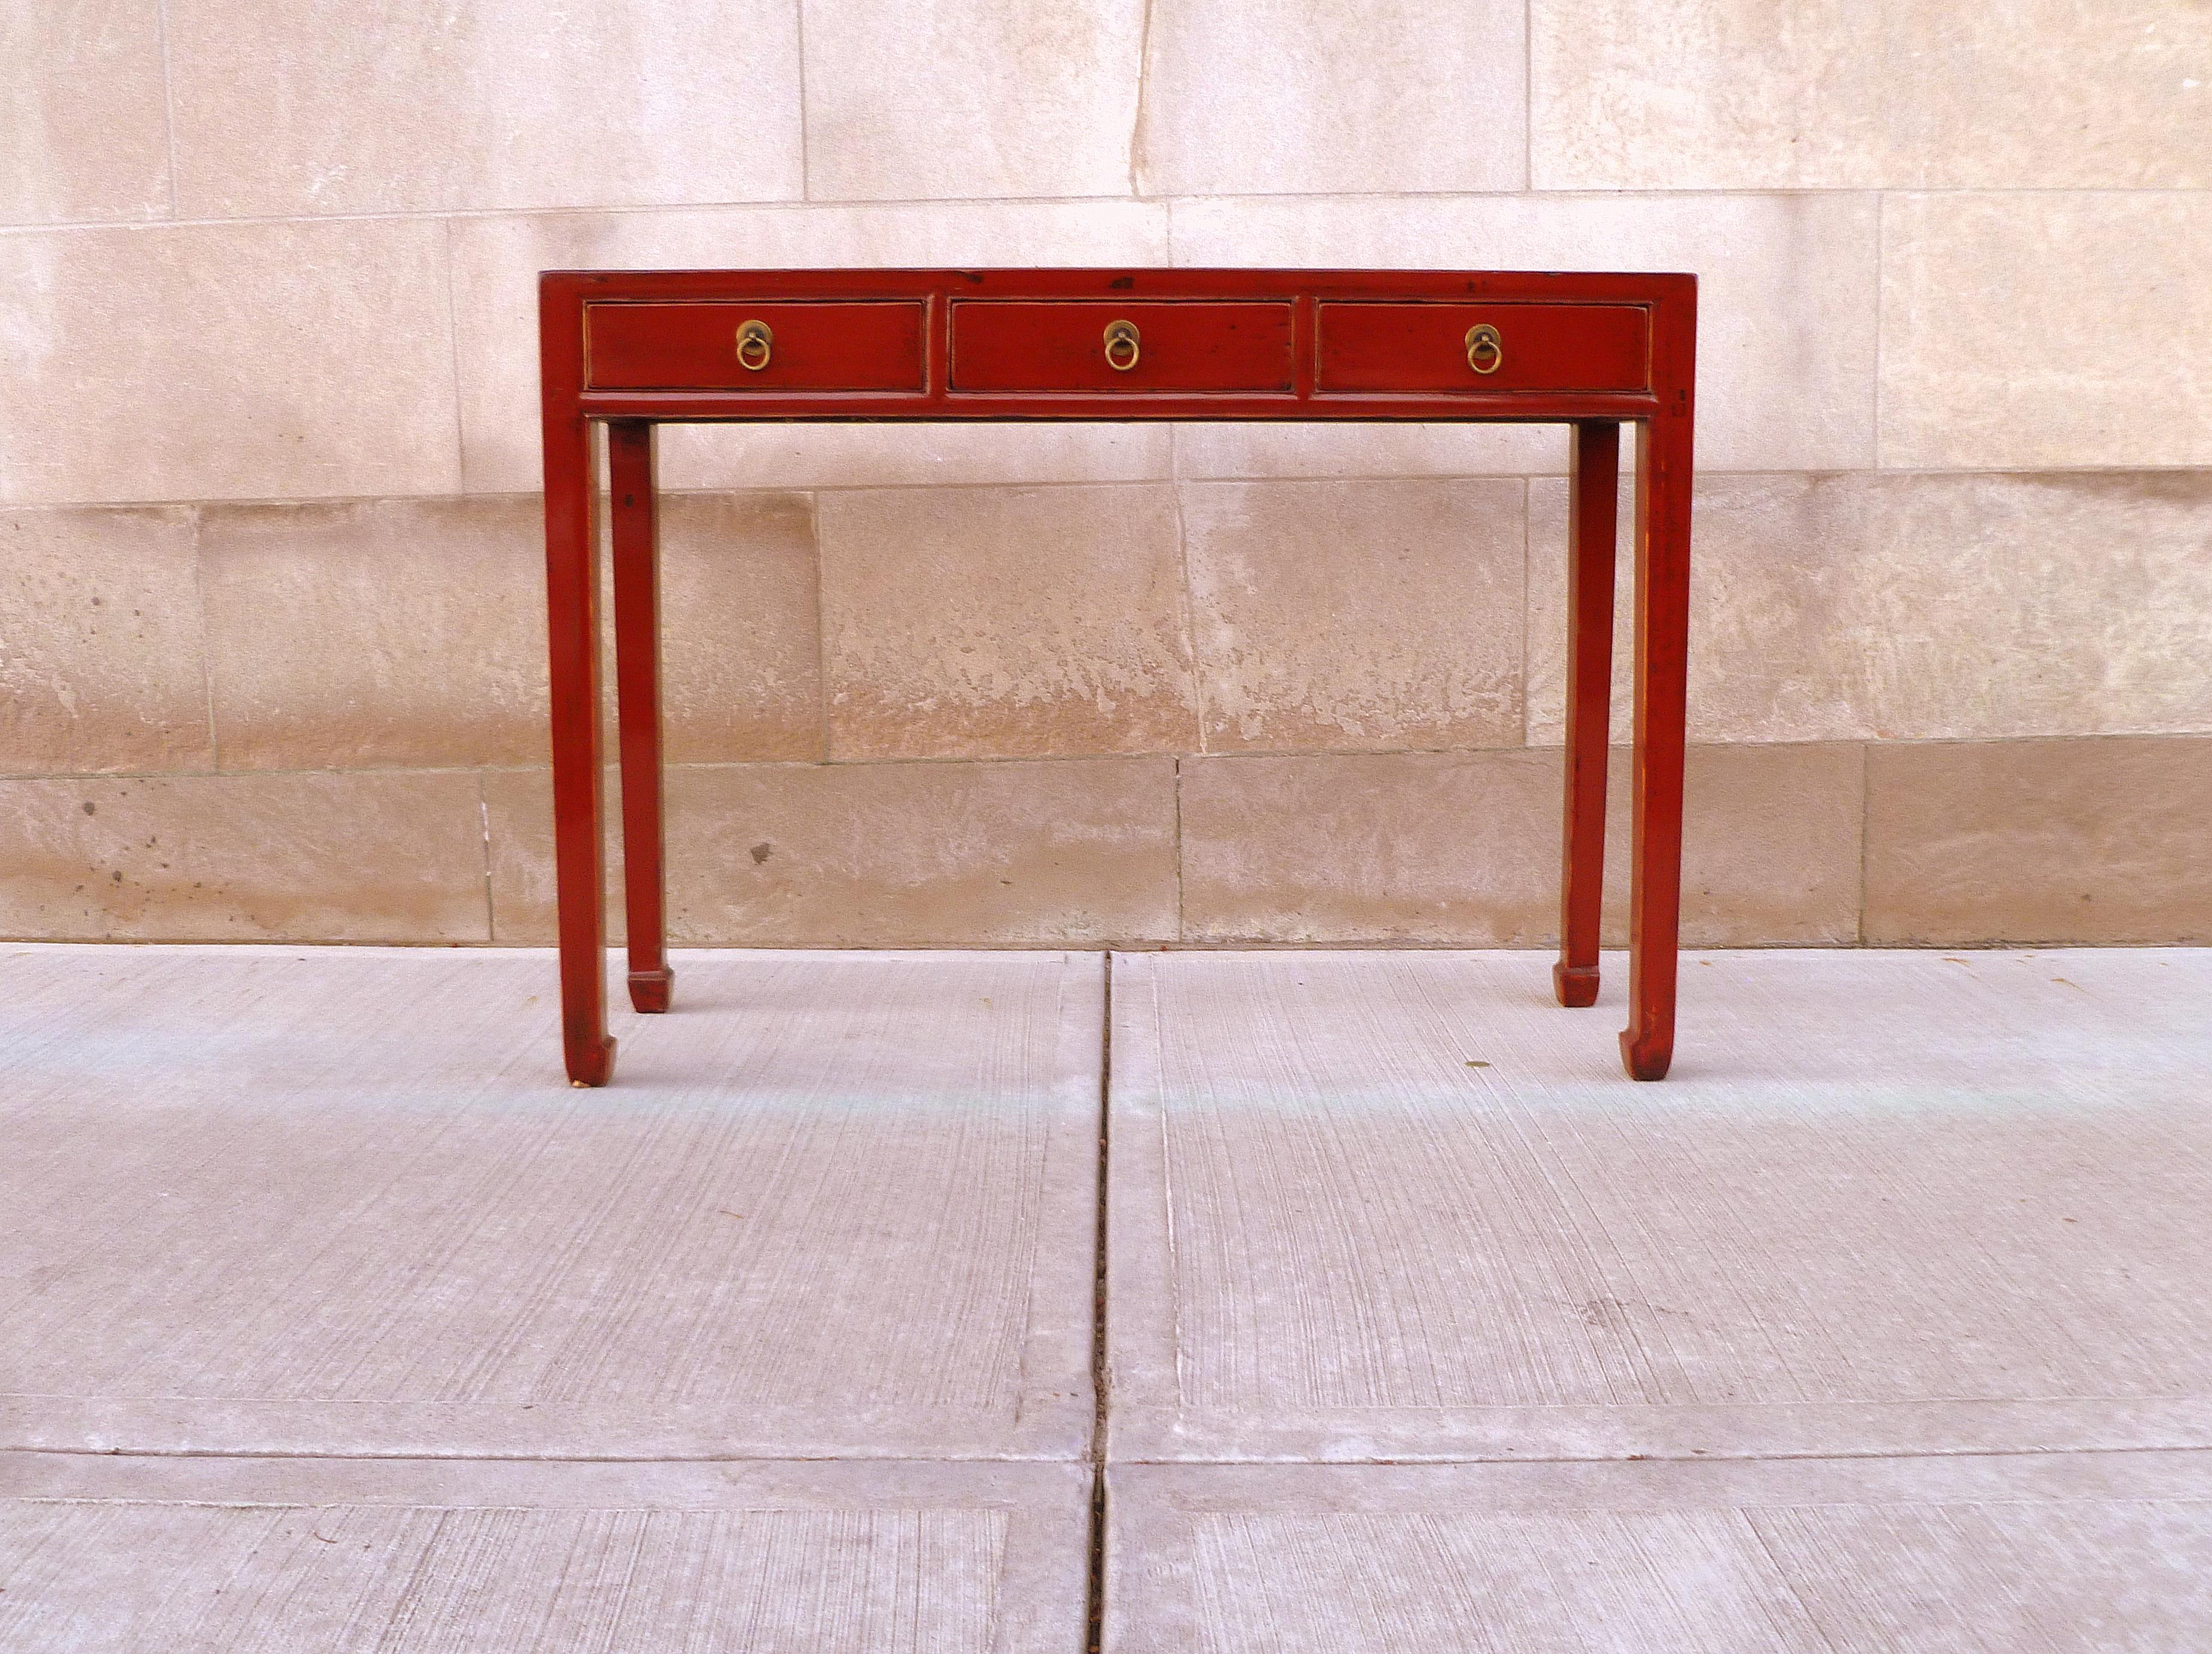 Red lacquer console table three drawers with walnut finished top surface.
We carry fine quality furniture with elegant finished and has been appeared many times in 